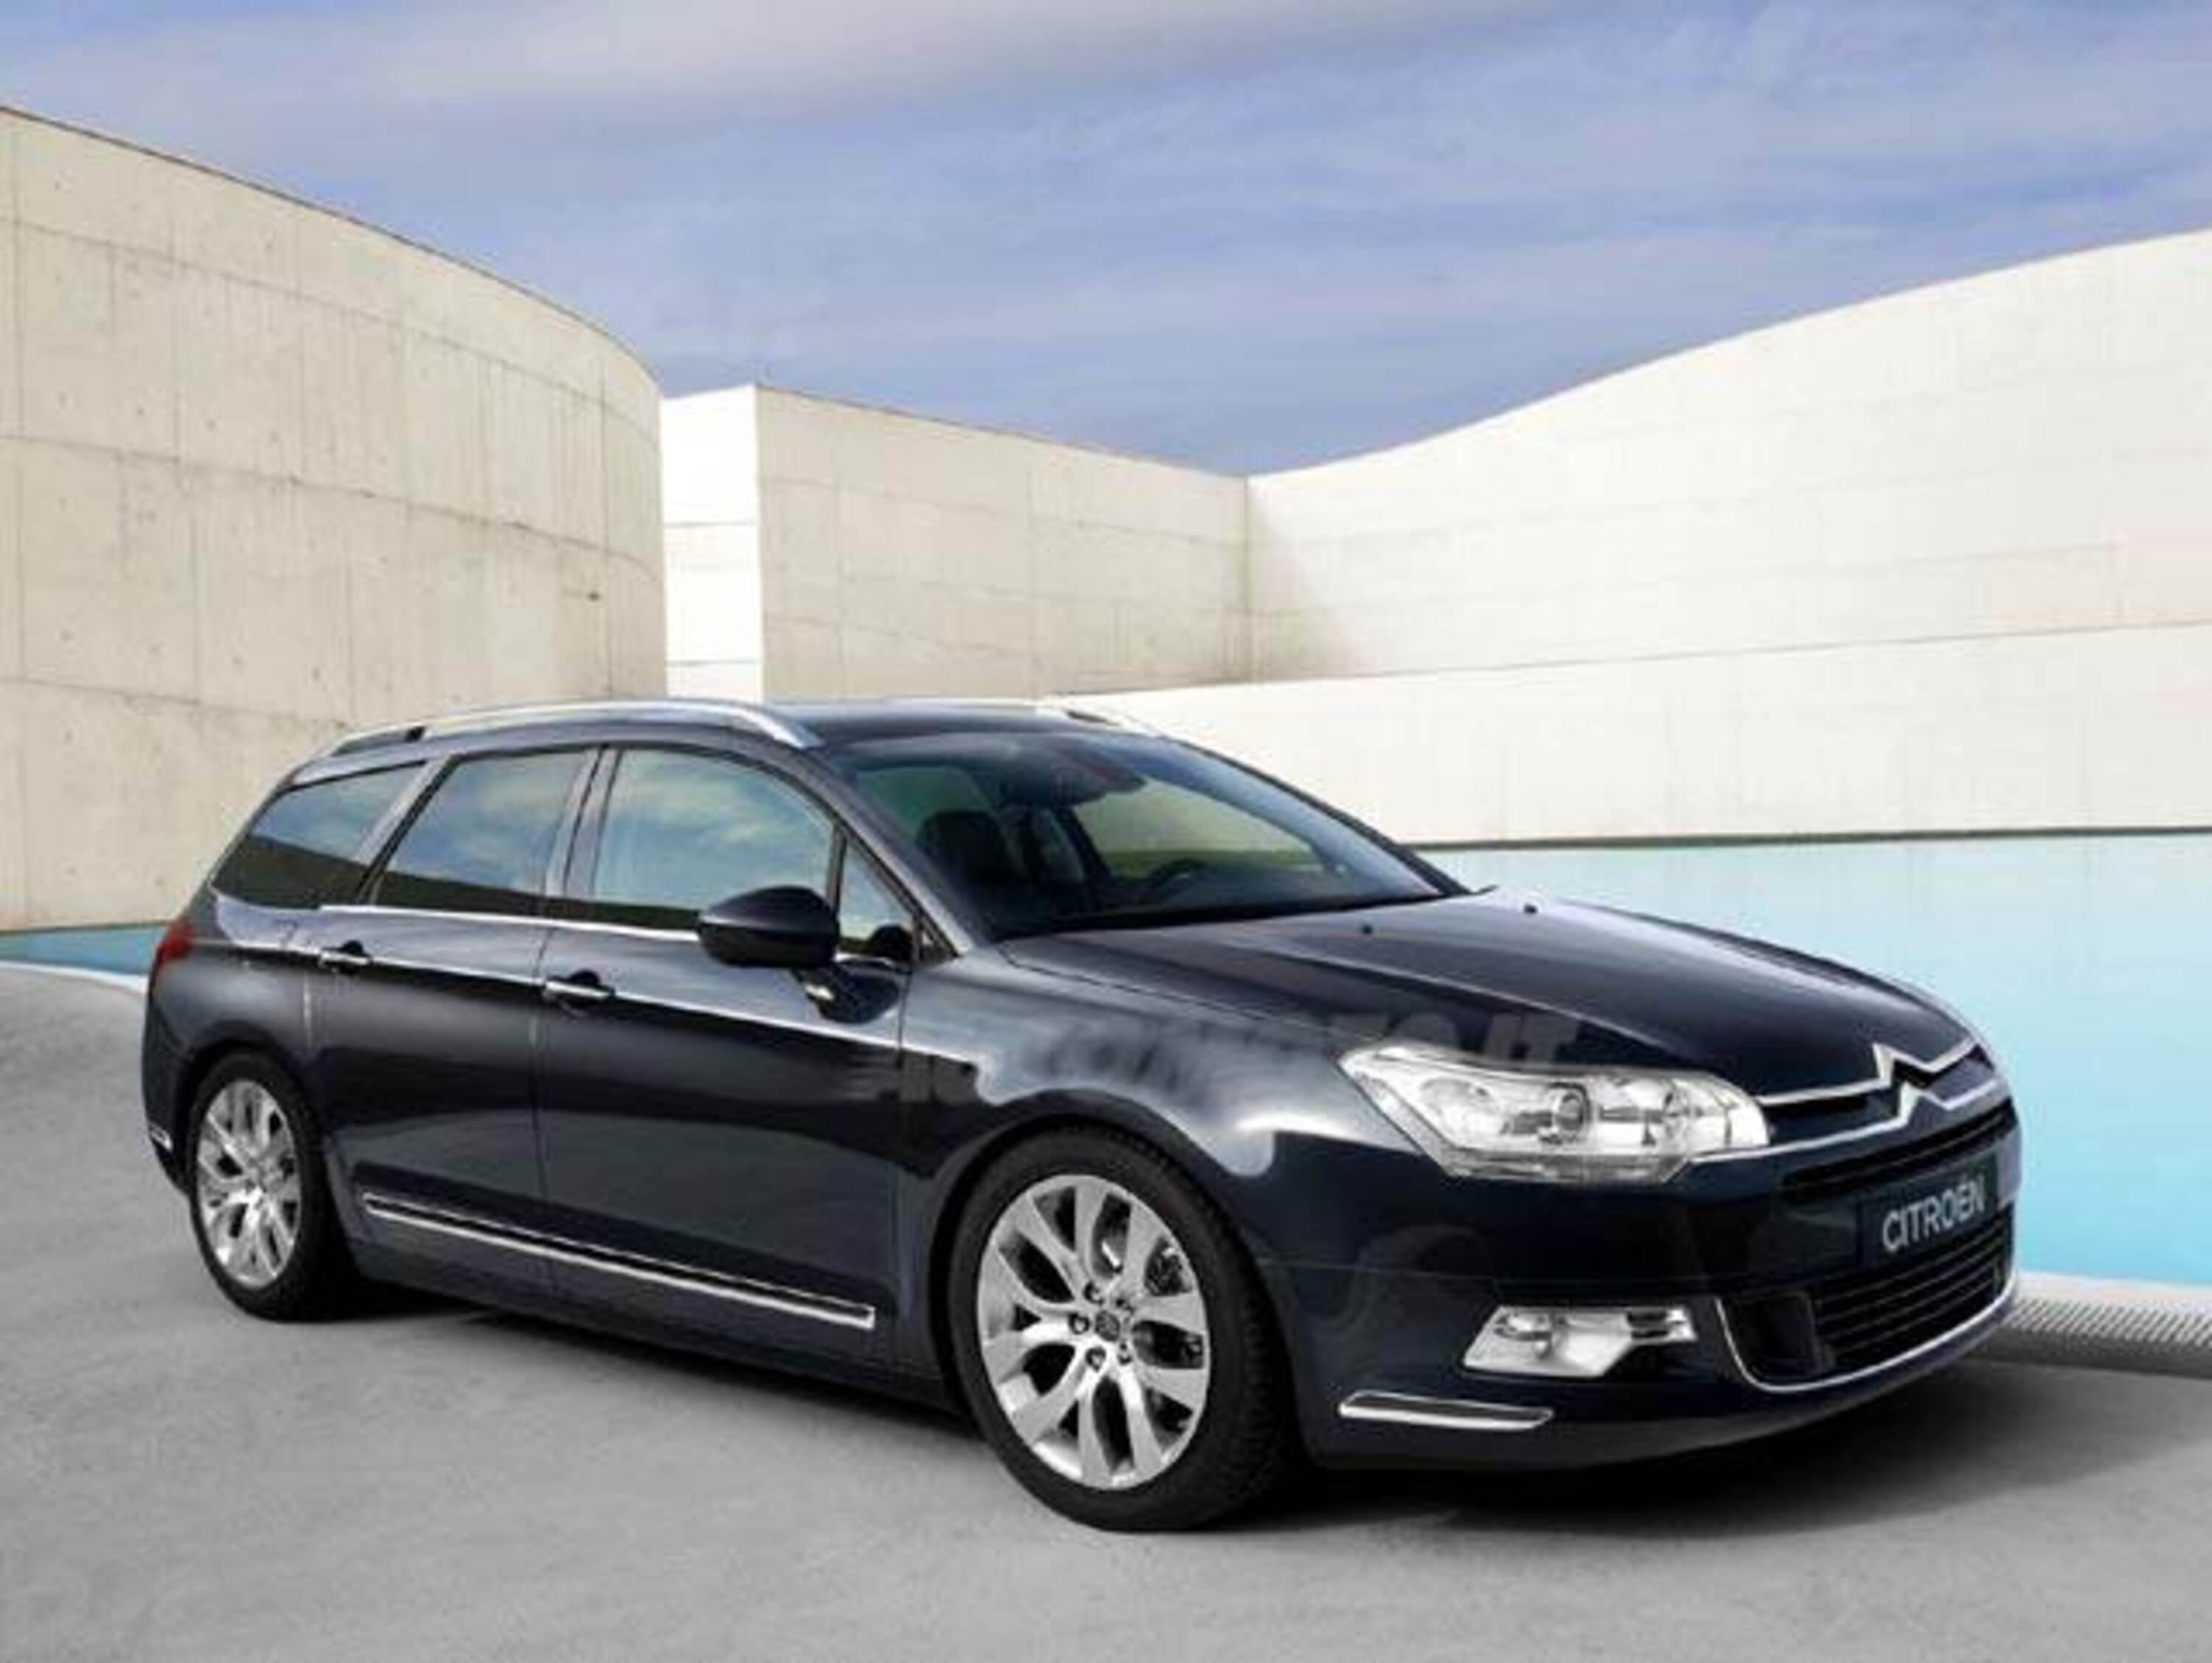 Citroen C5 Station Wagon 2.0 HDi 163 aut. Exclusive Style